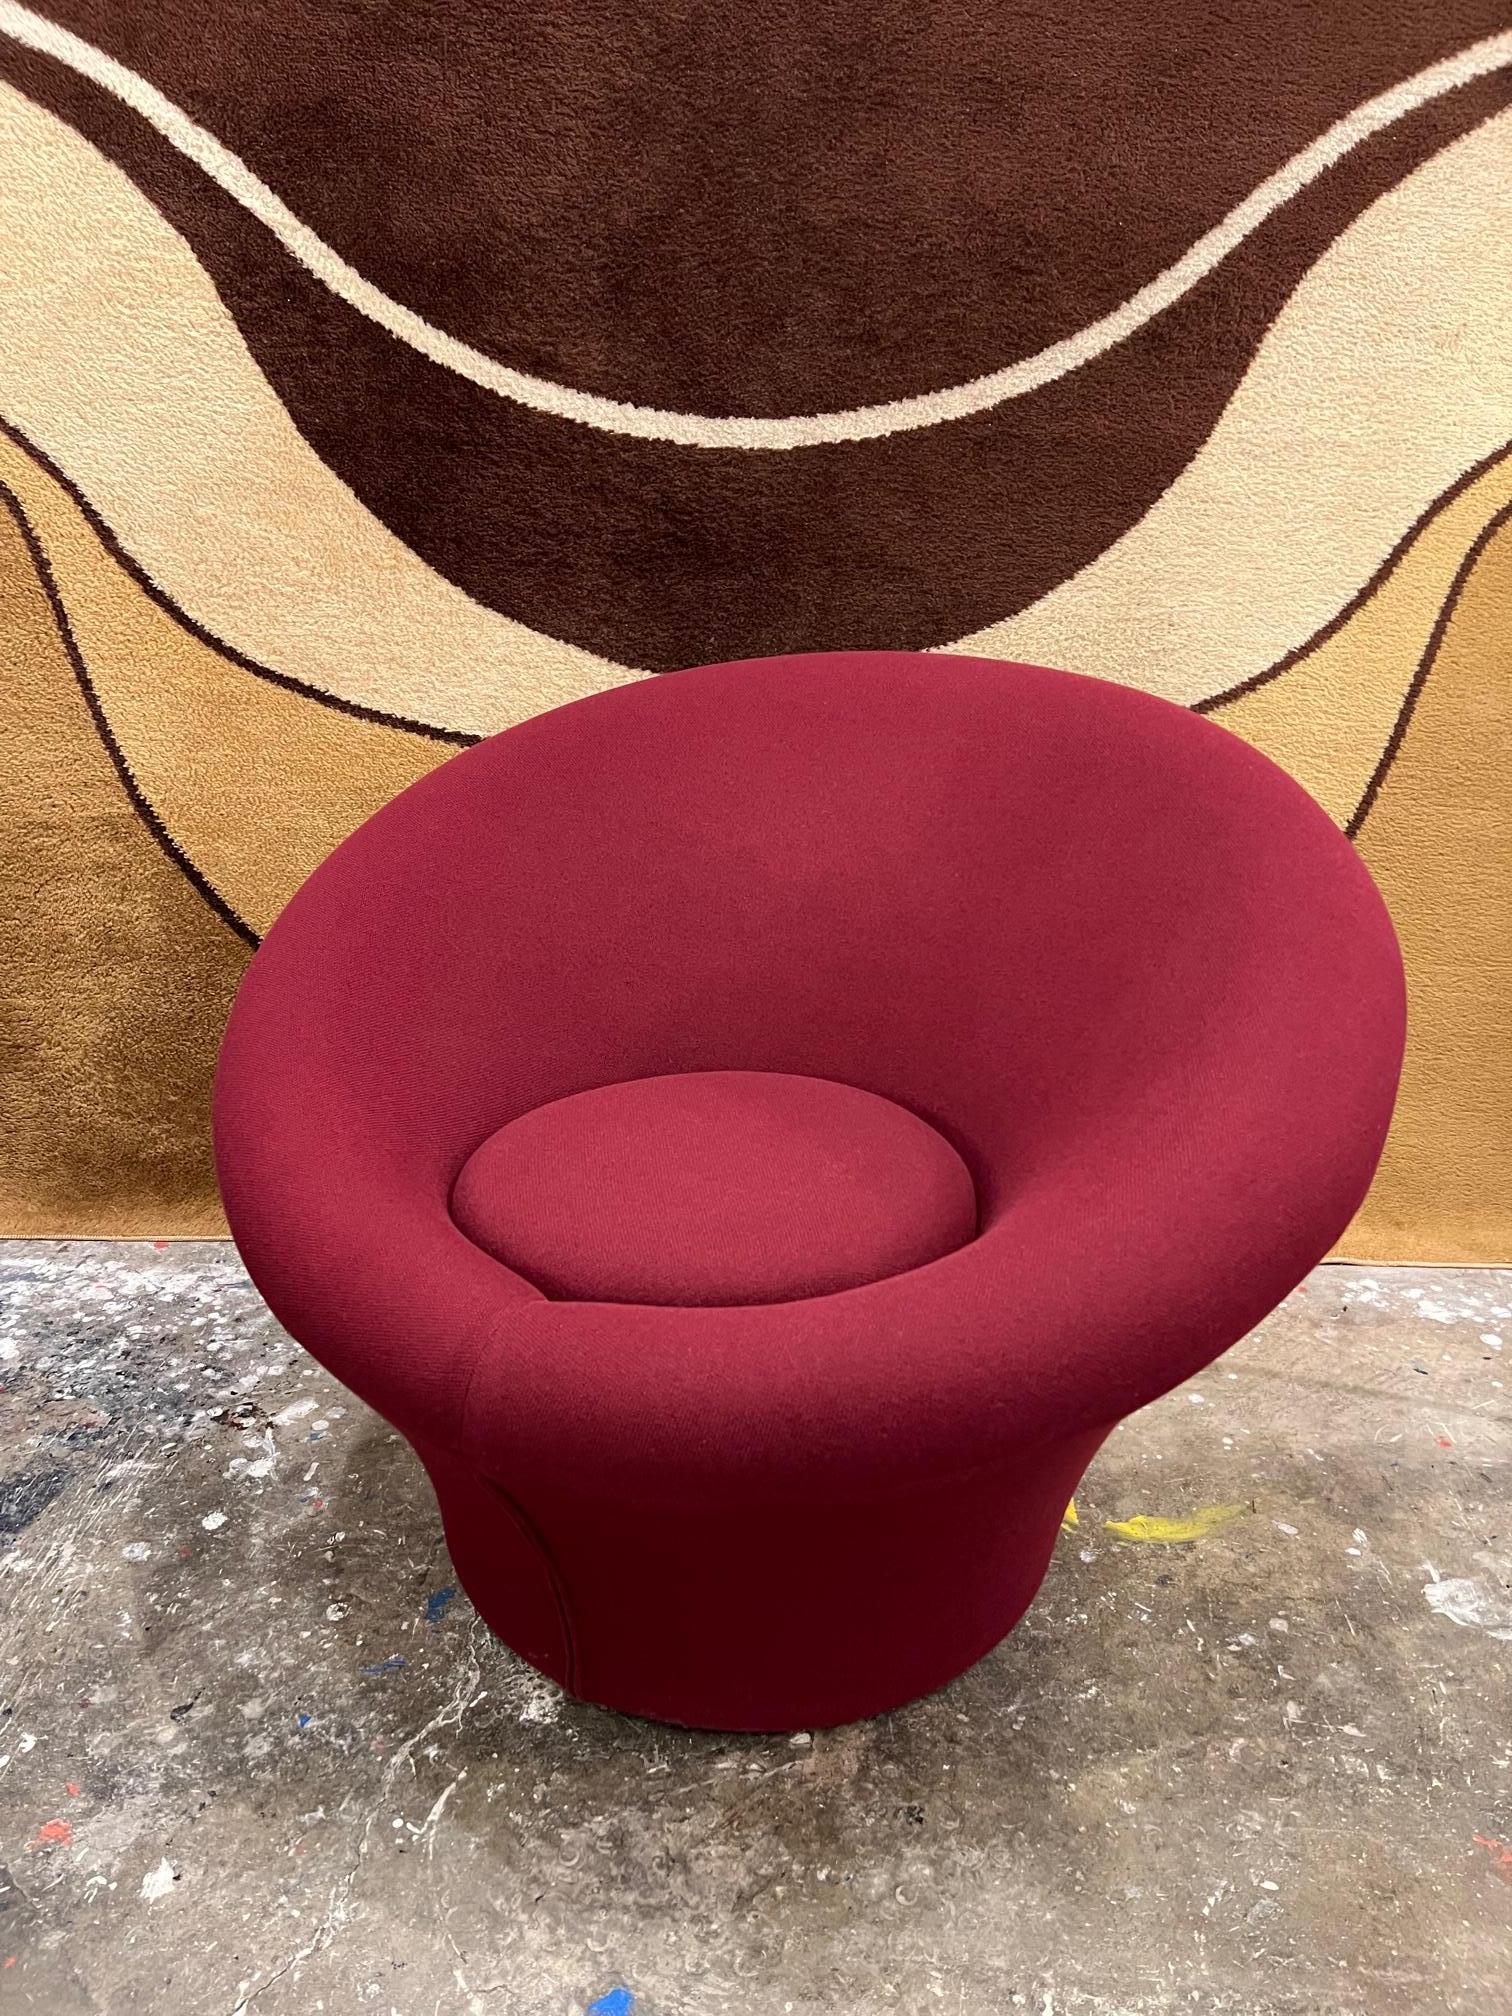 Pierre Paulin original mushroom chair , model F560 , edited by Artifort 
Chairs are in very good vintage condition , upholstered their original burgundy wool 
Set of 4 chairs available , sold separately. 
